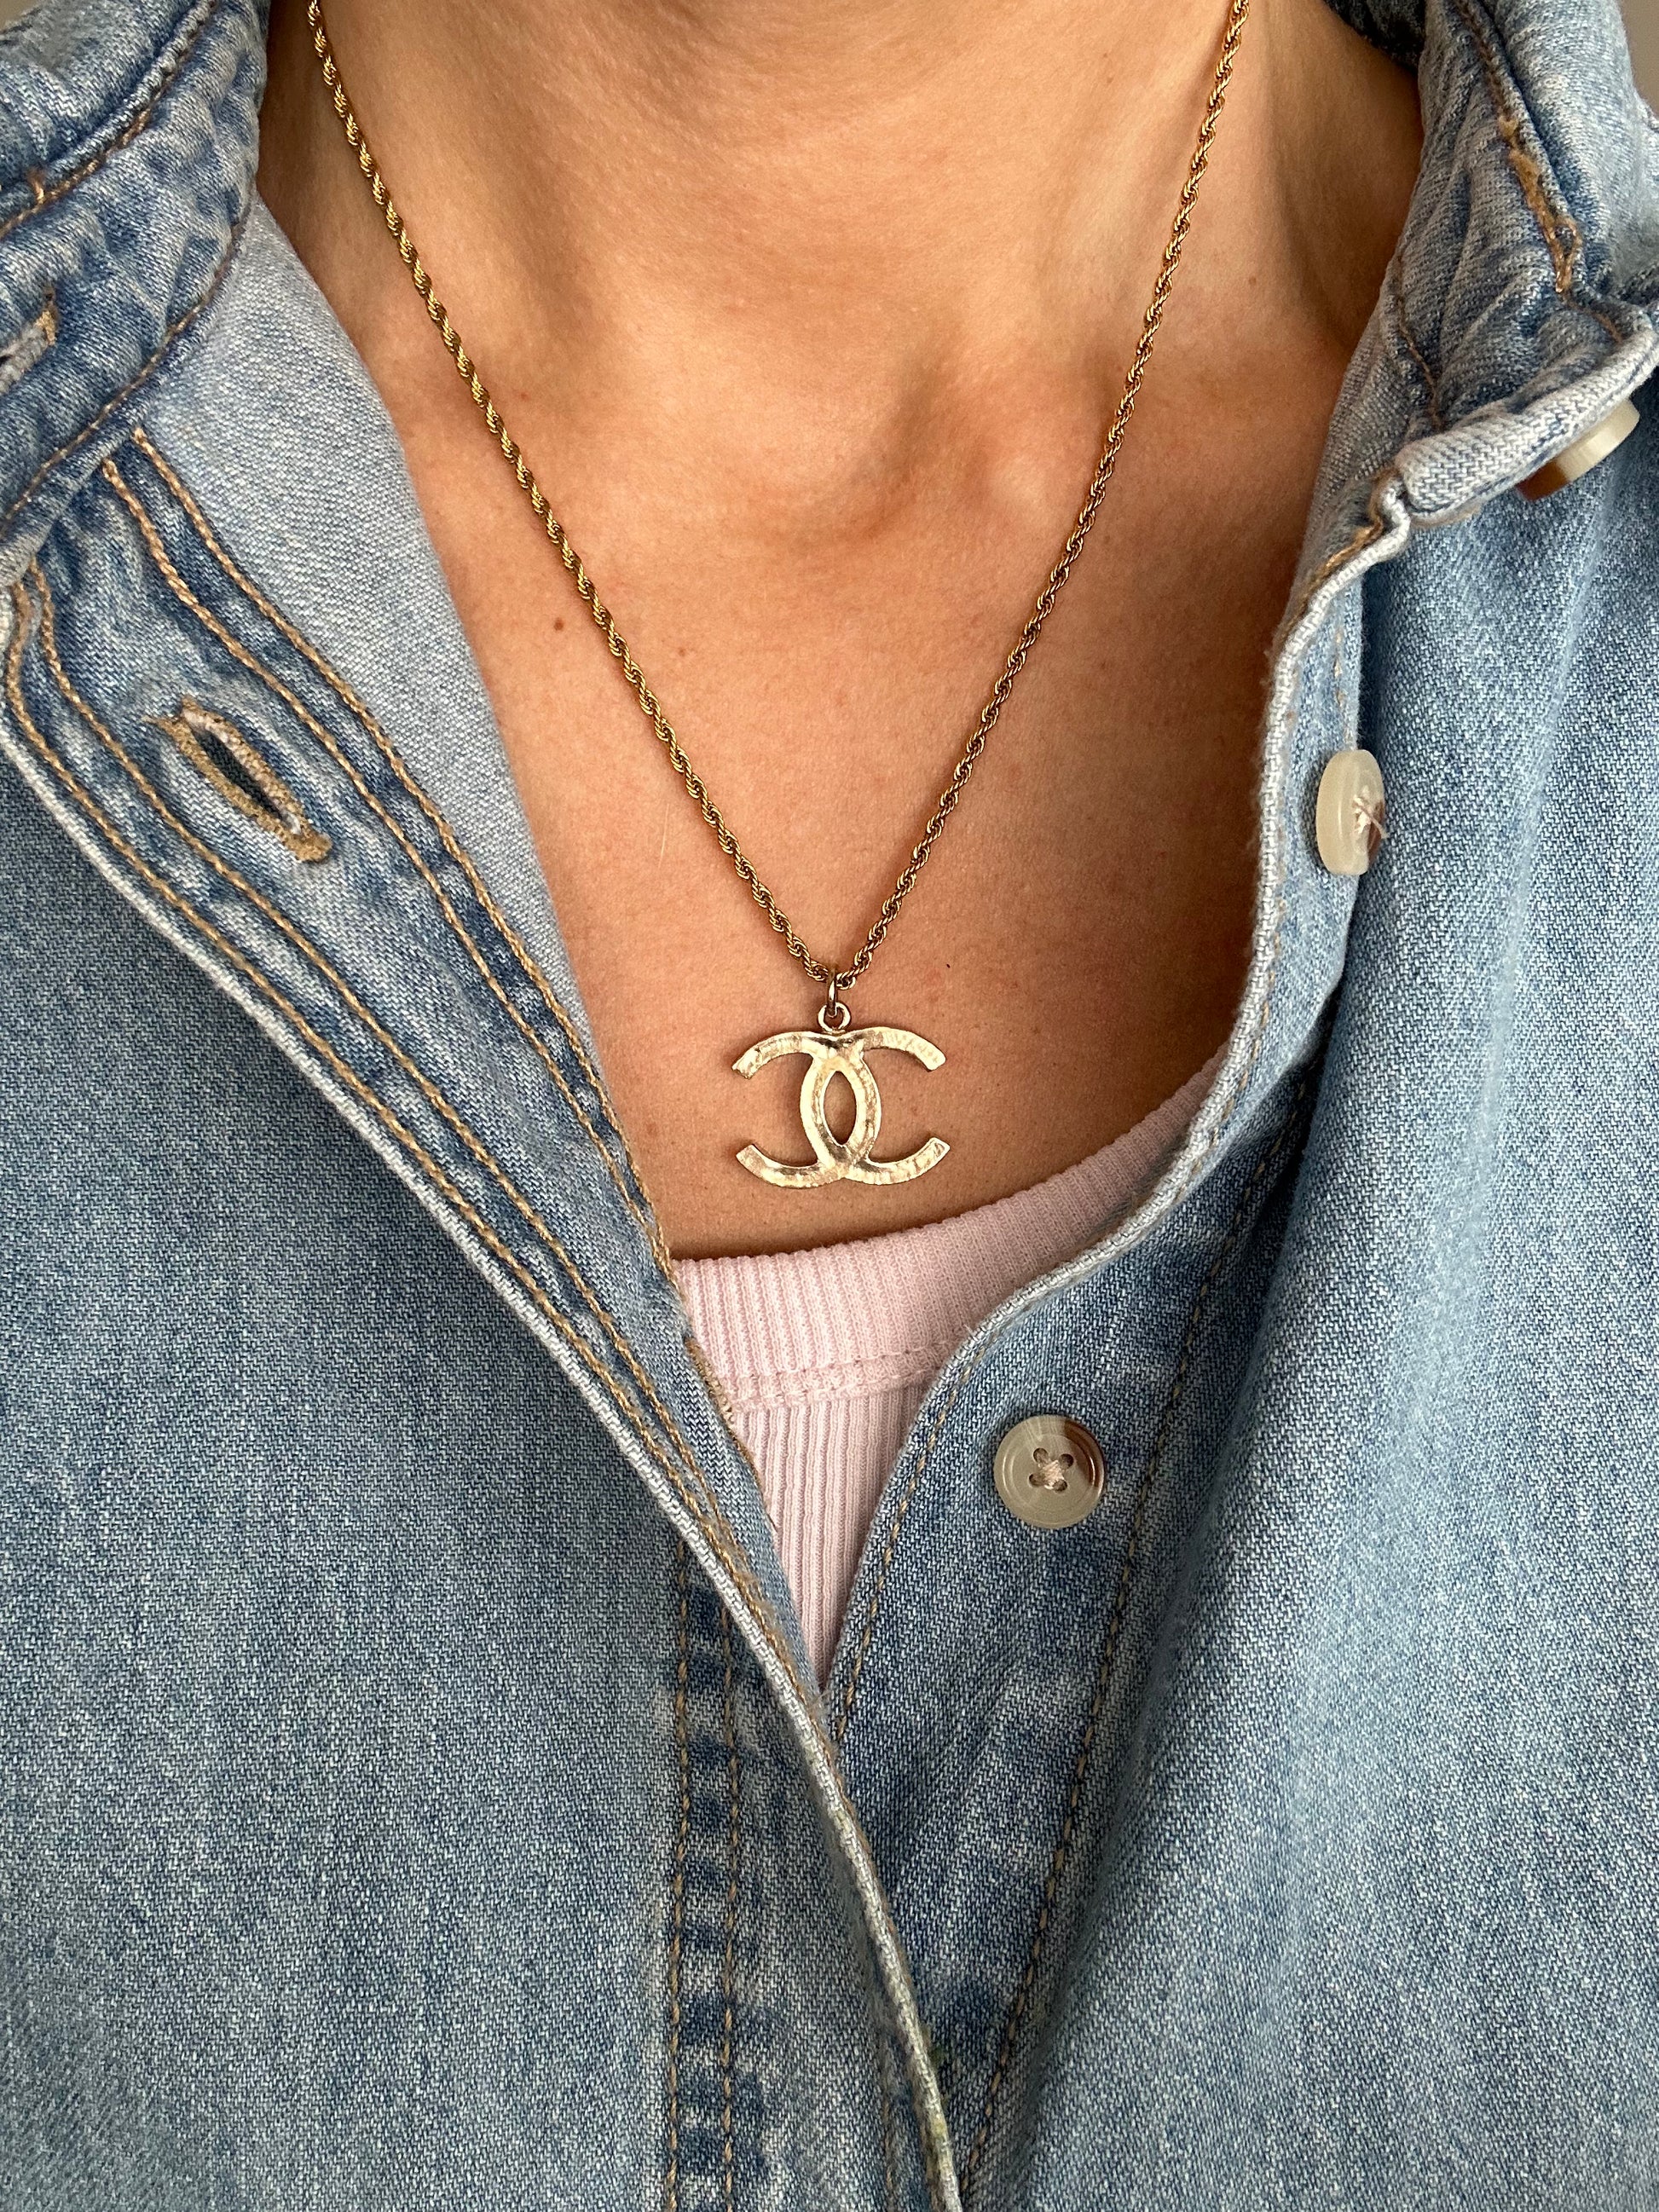 Authentic Reworked Chanel Necklace - Large CC